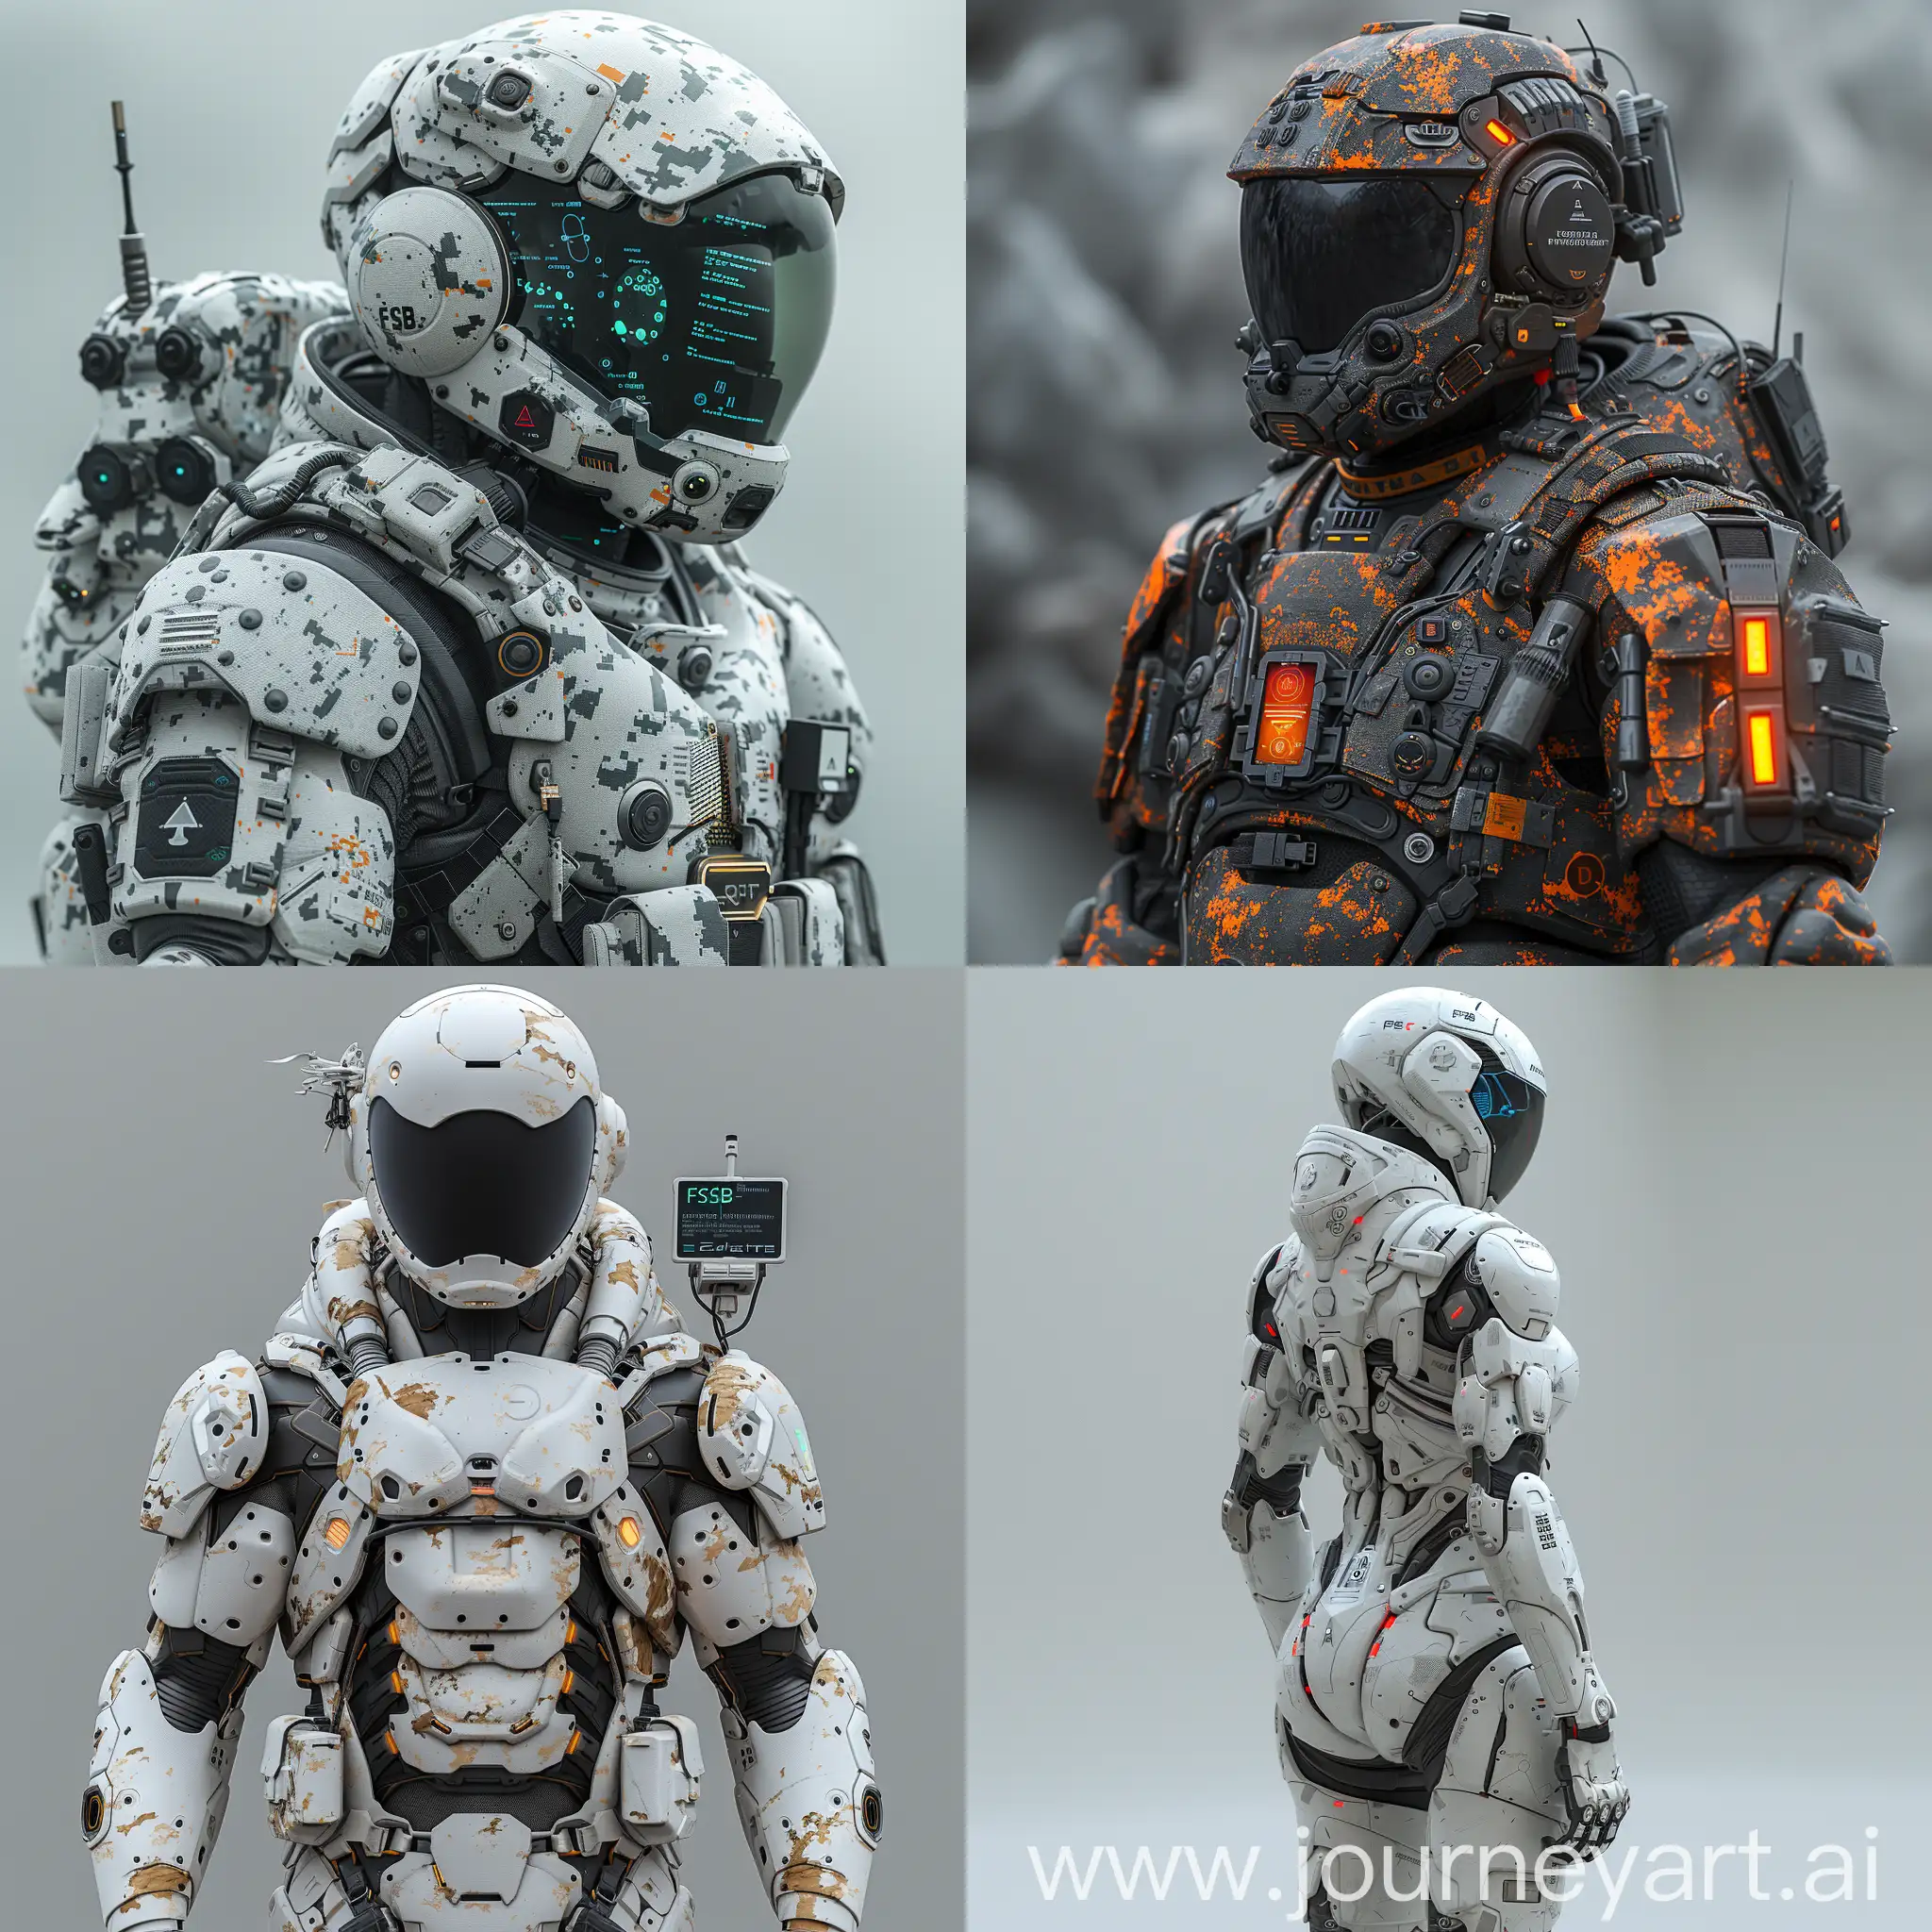 Advanced-FSB-Suit-with-Adaptive-Camouflage-and-Biometric-Monitoring-System